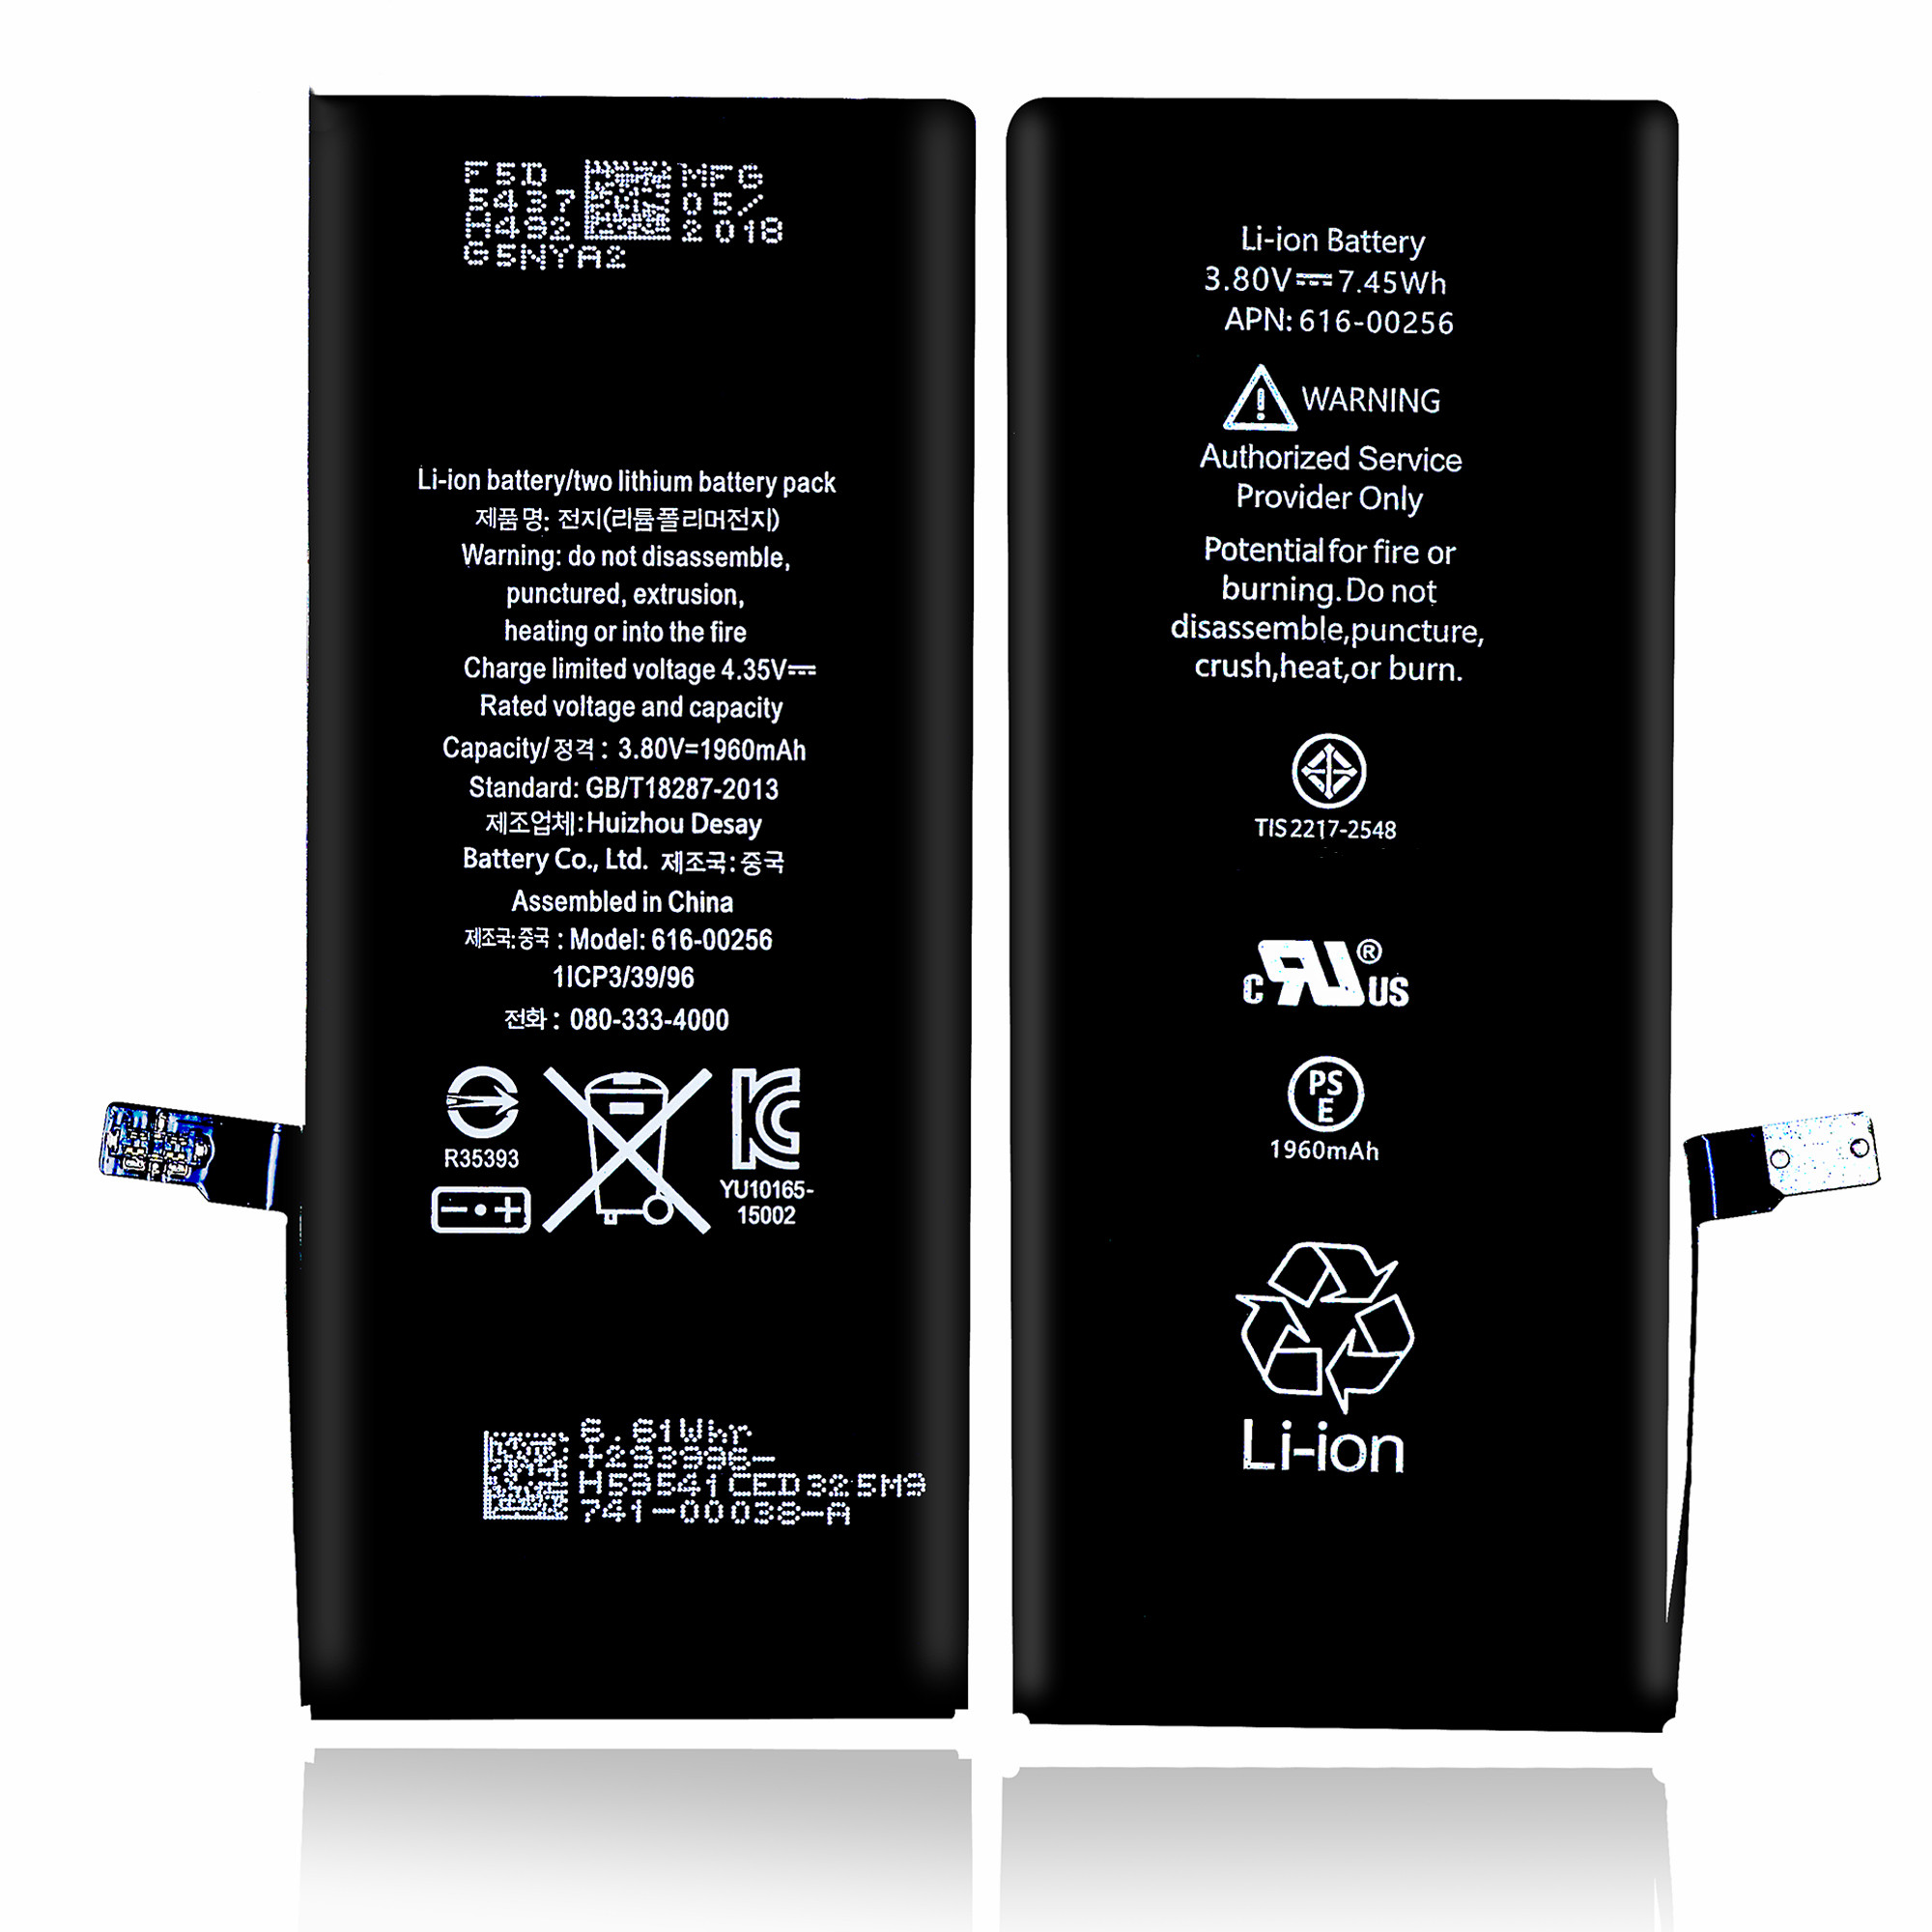 Iphone7G battery